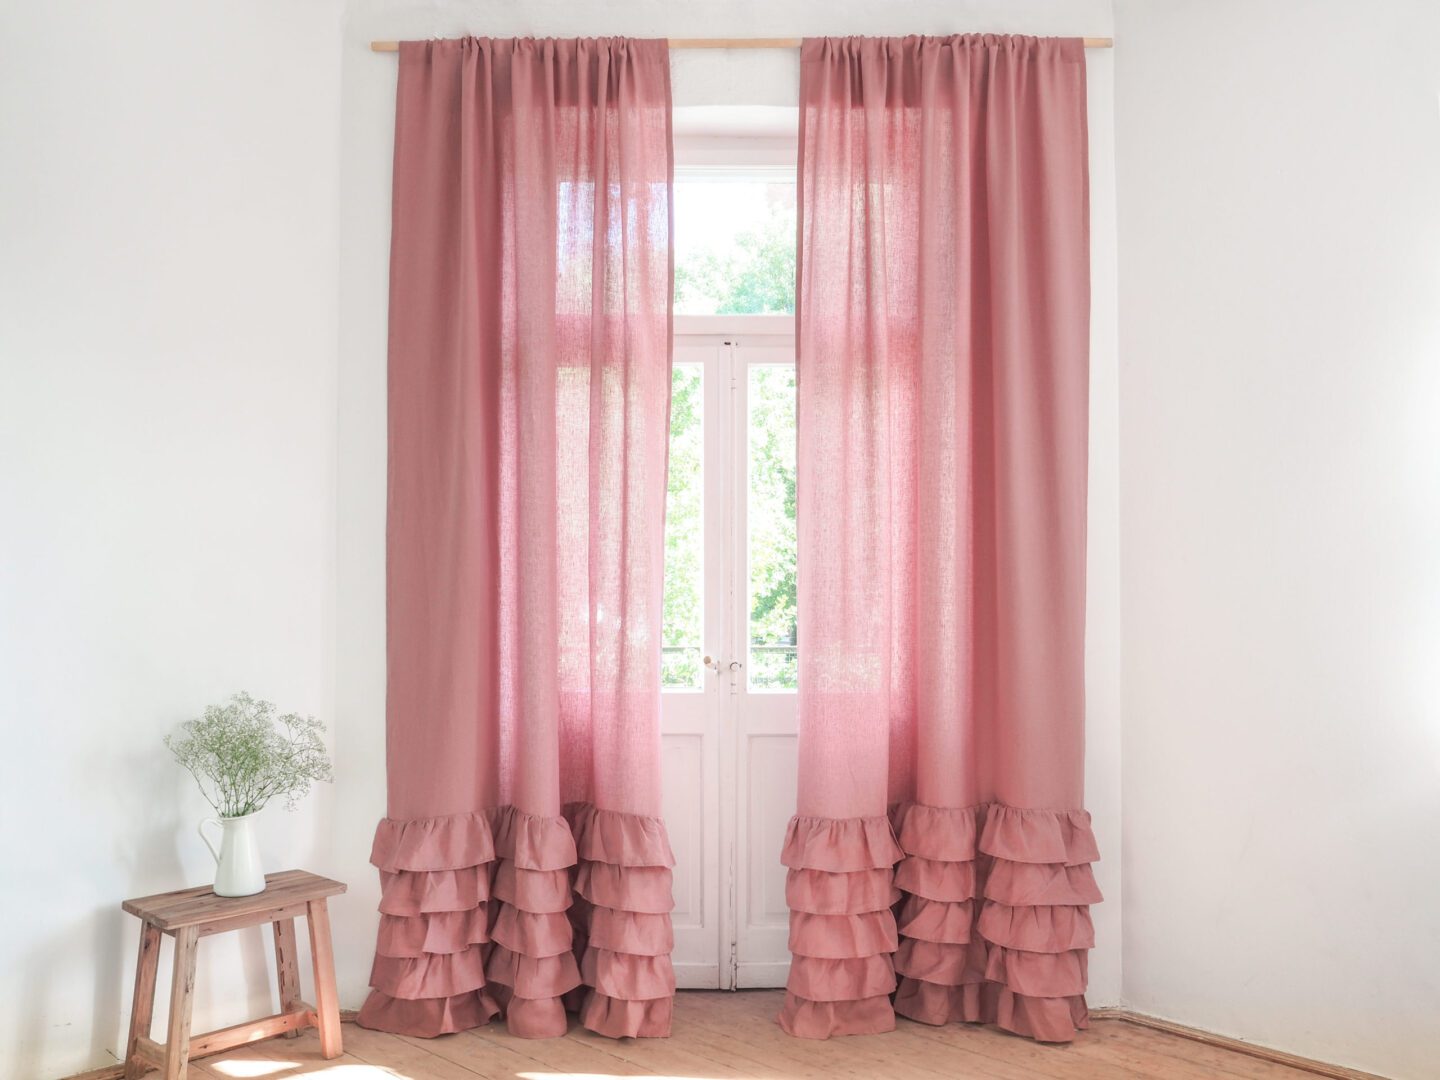 Dusty pink linen curtain with ruffles